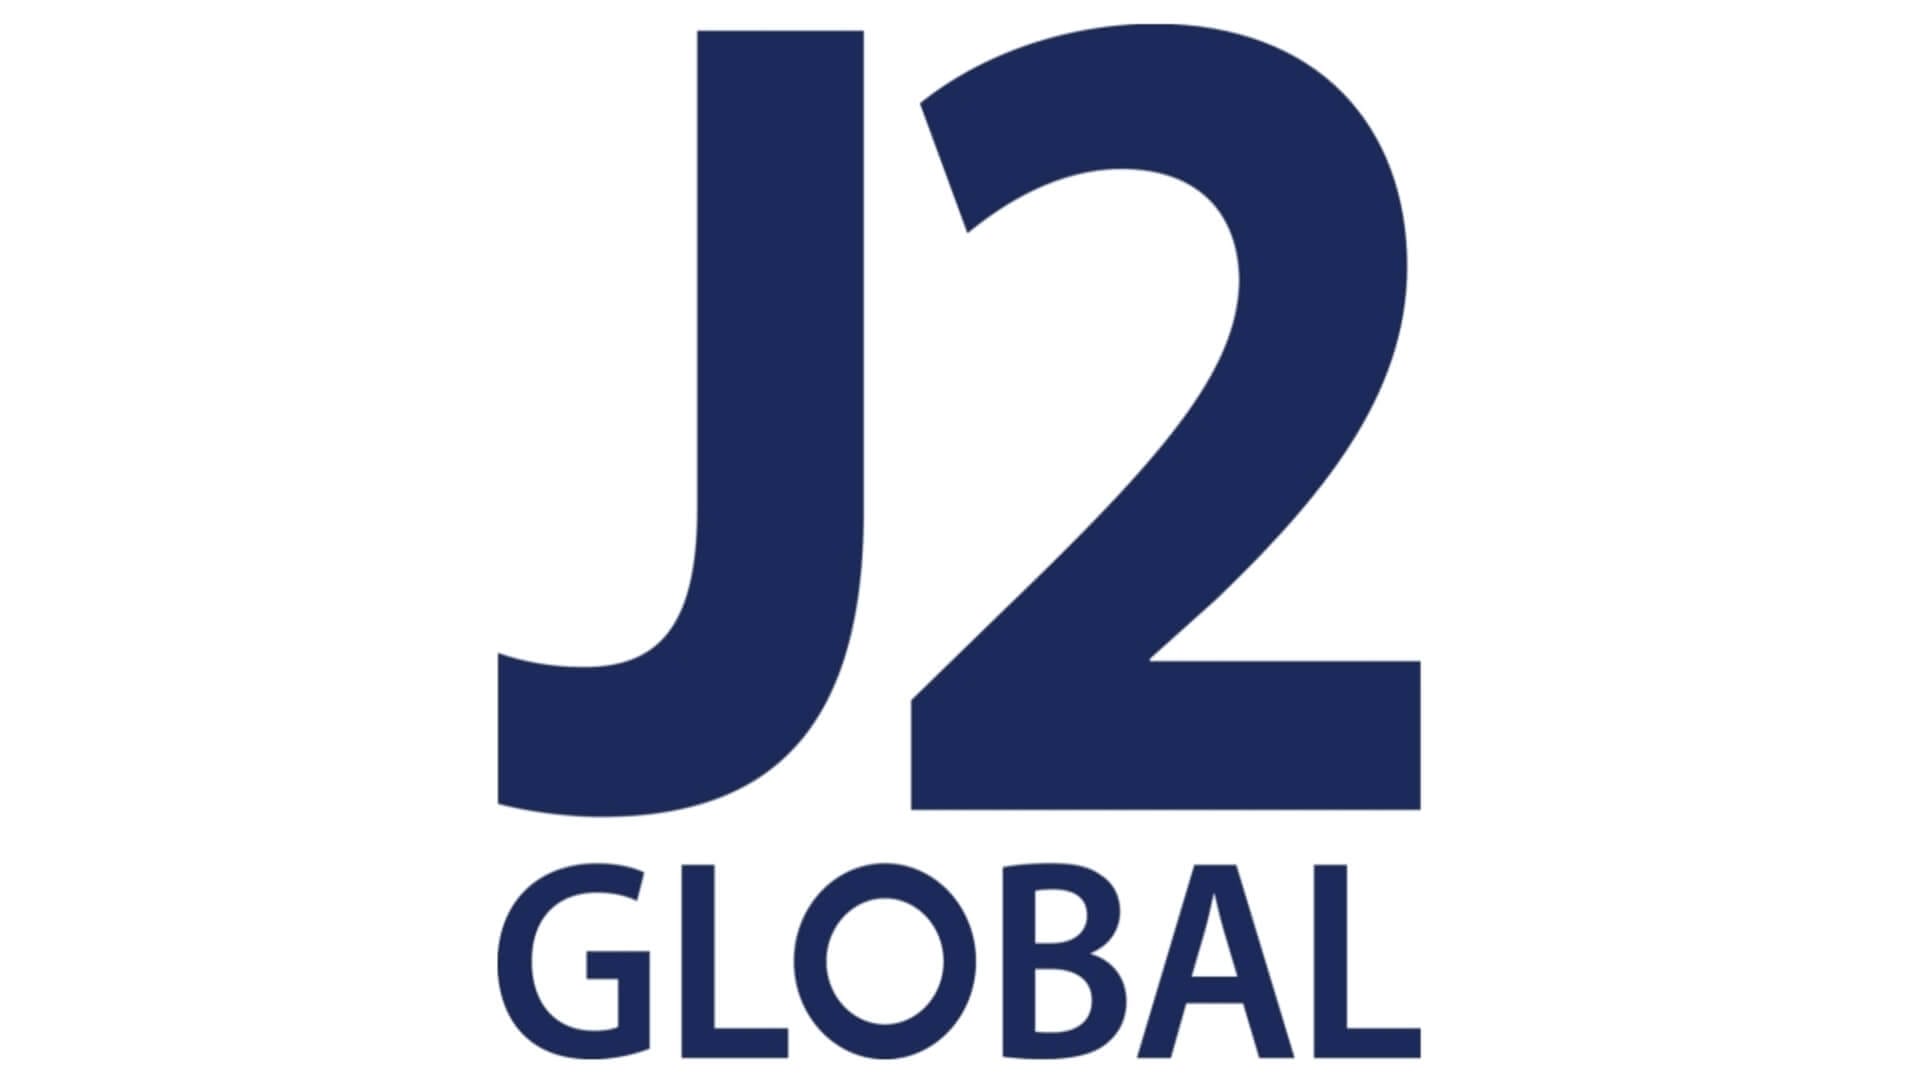 The logo for J2 Global, the parent company of IGN.